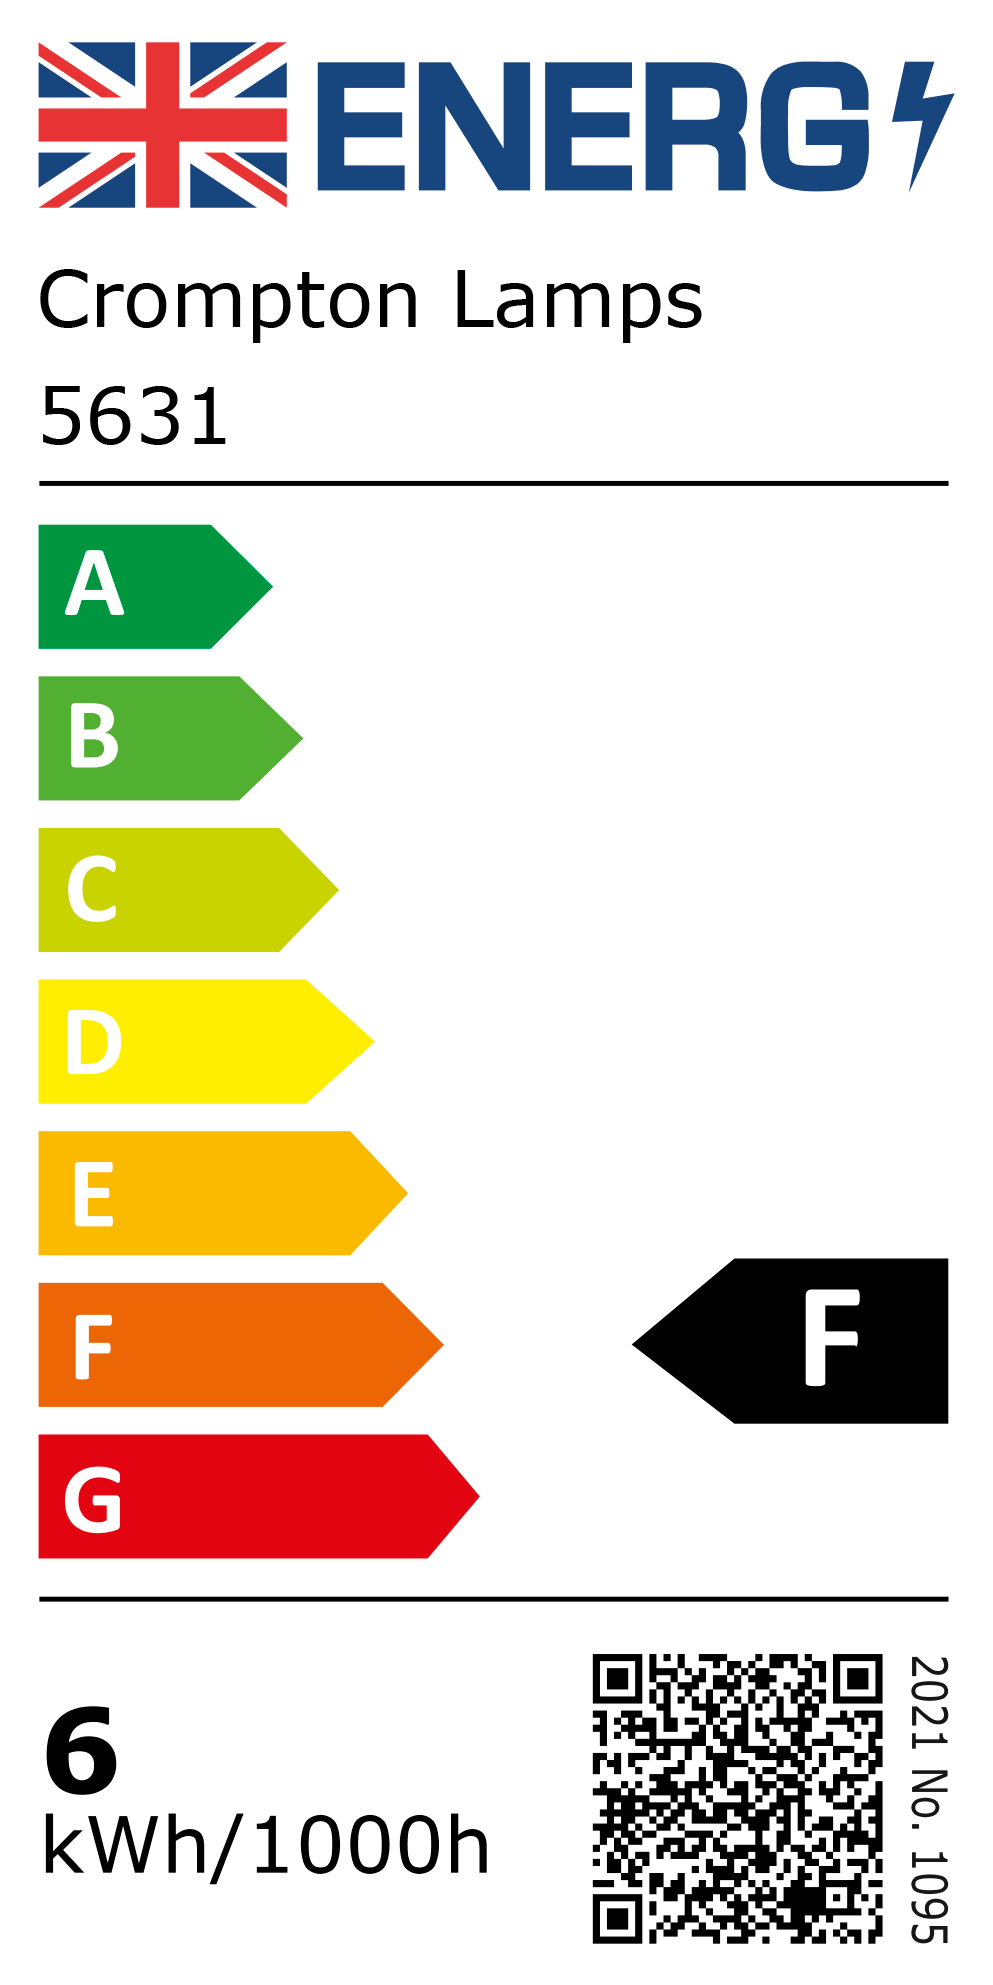 New 2021 Energy Rating Label: Stock Code 5631